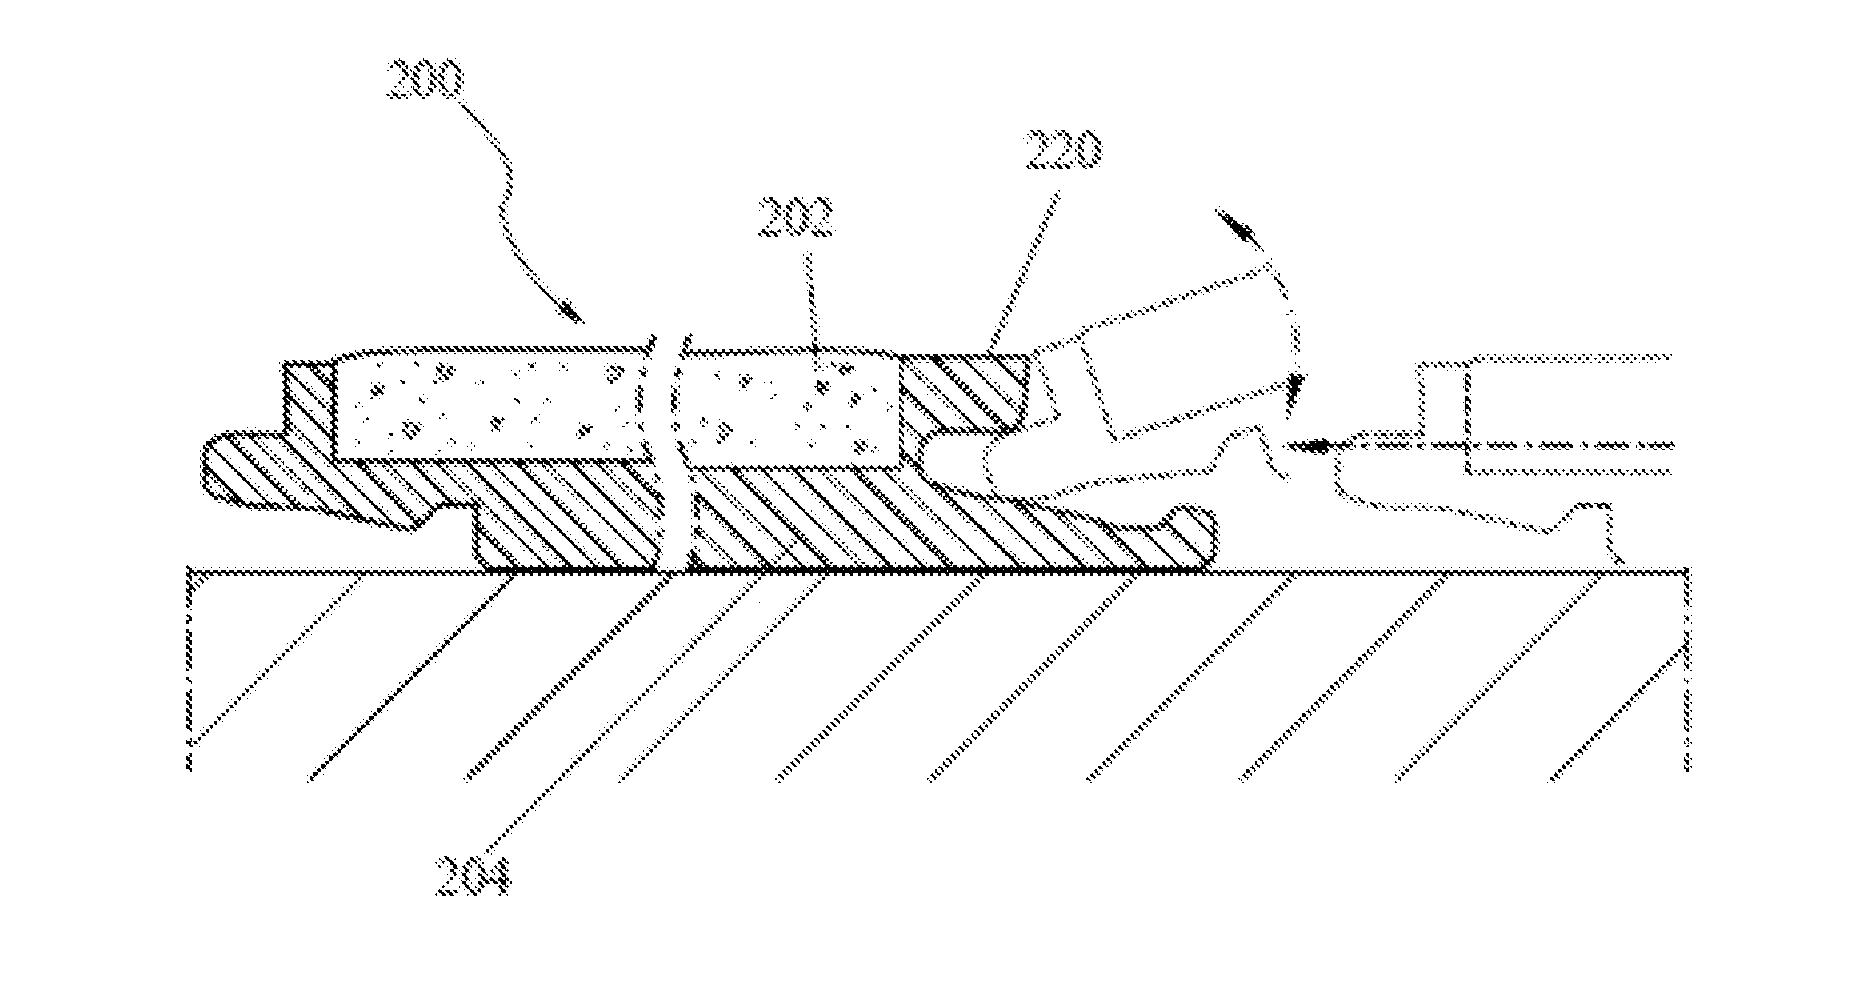 Groutless tile system and method for making the same